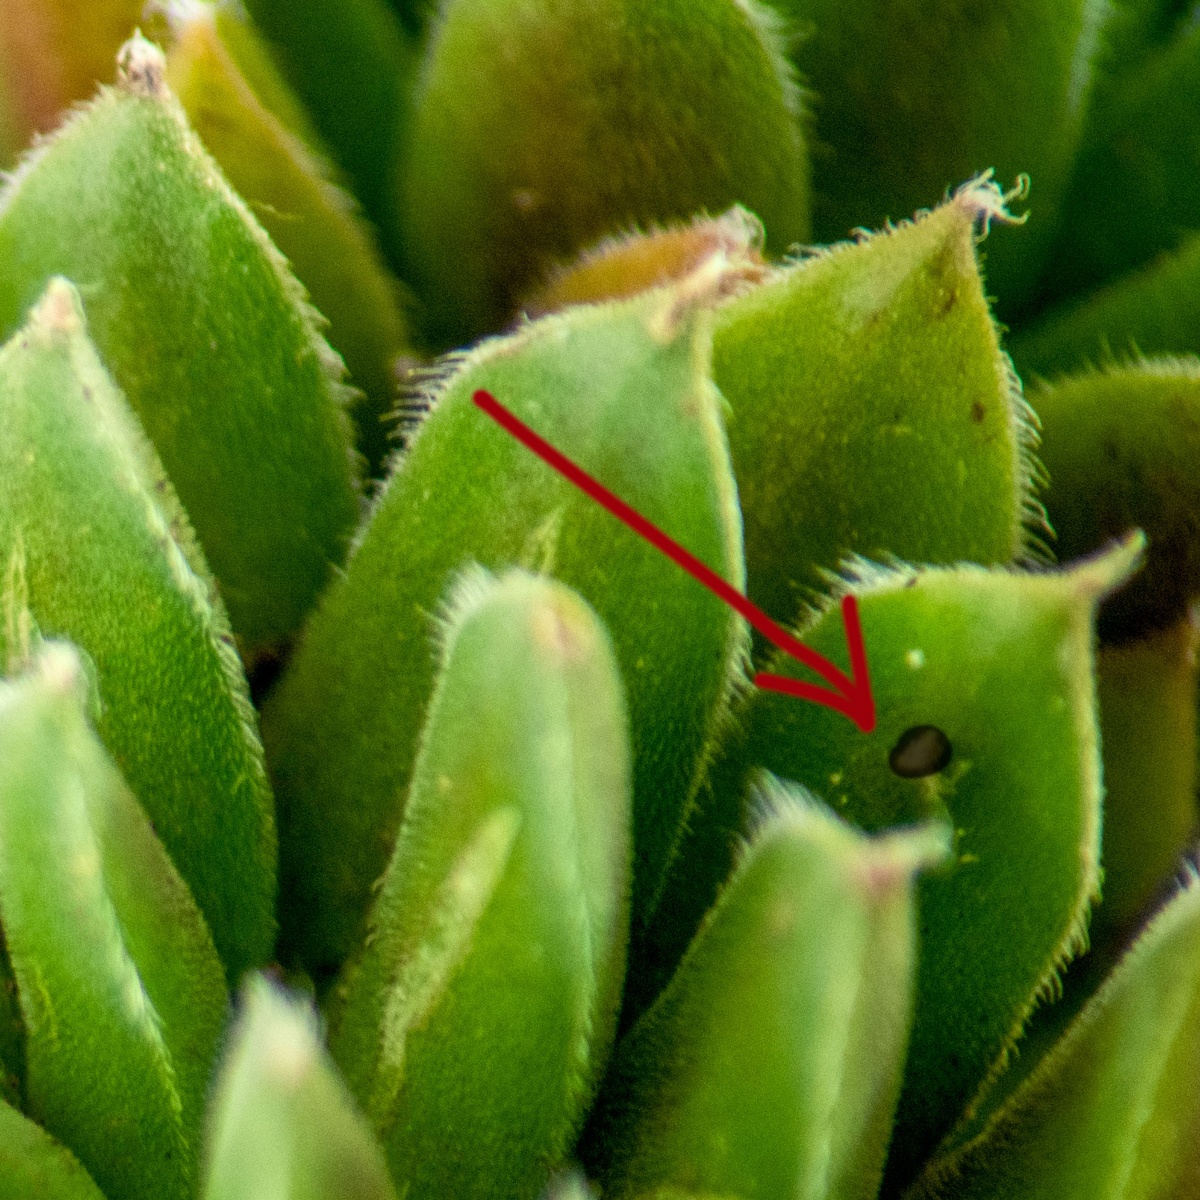 Closeup of succulent that shows the healing brush tool working on a dirt spot